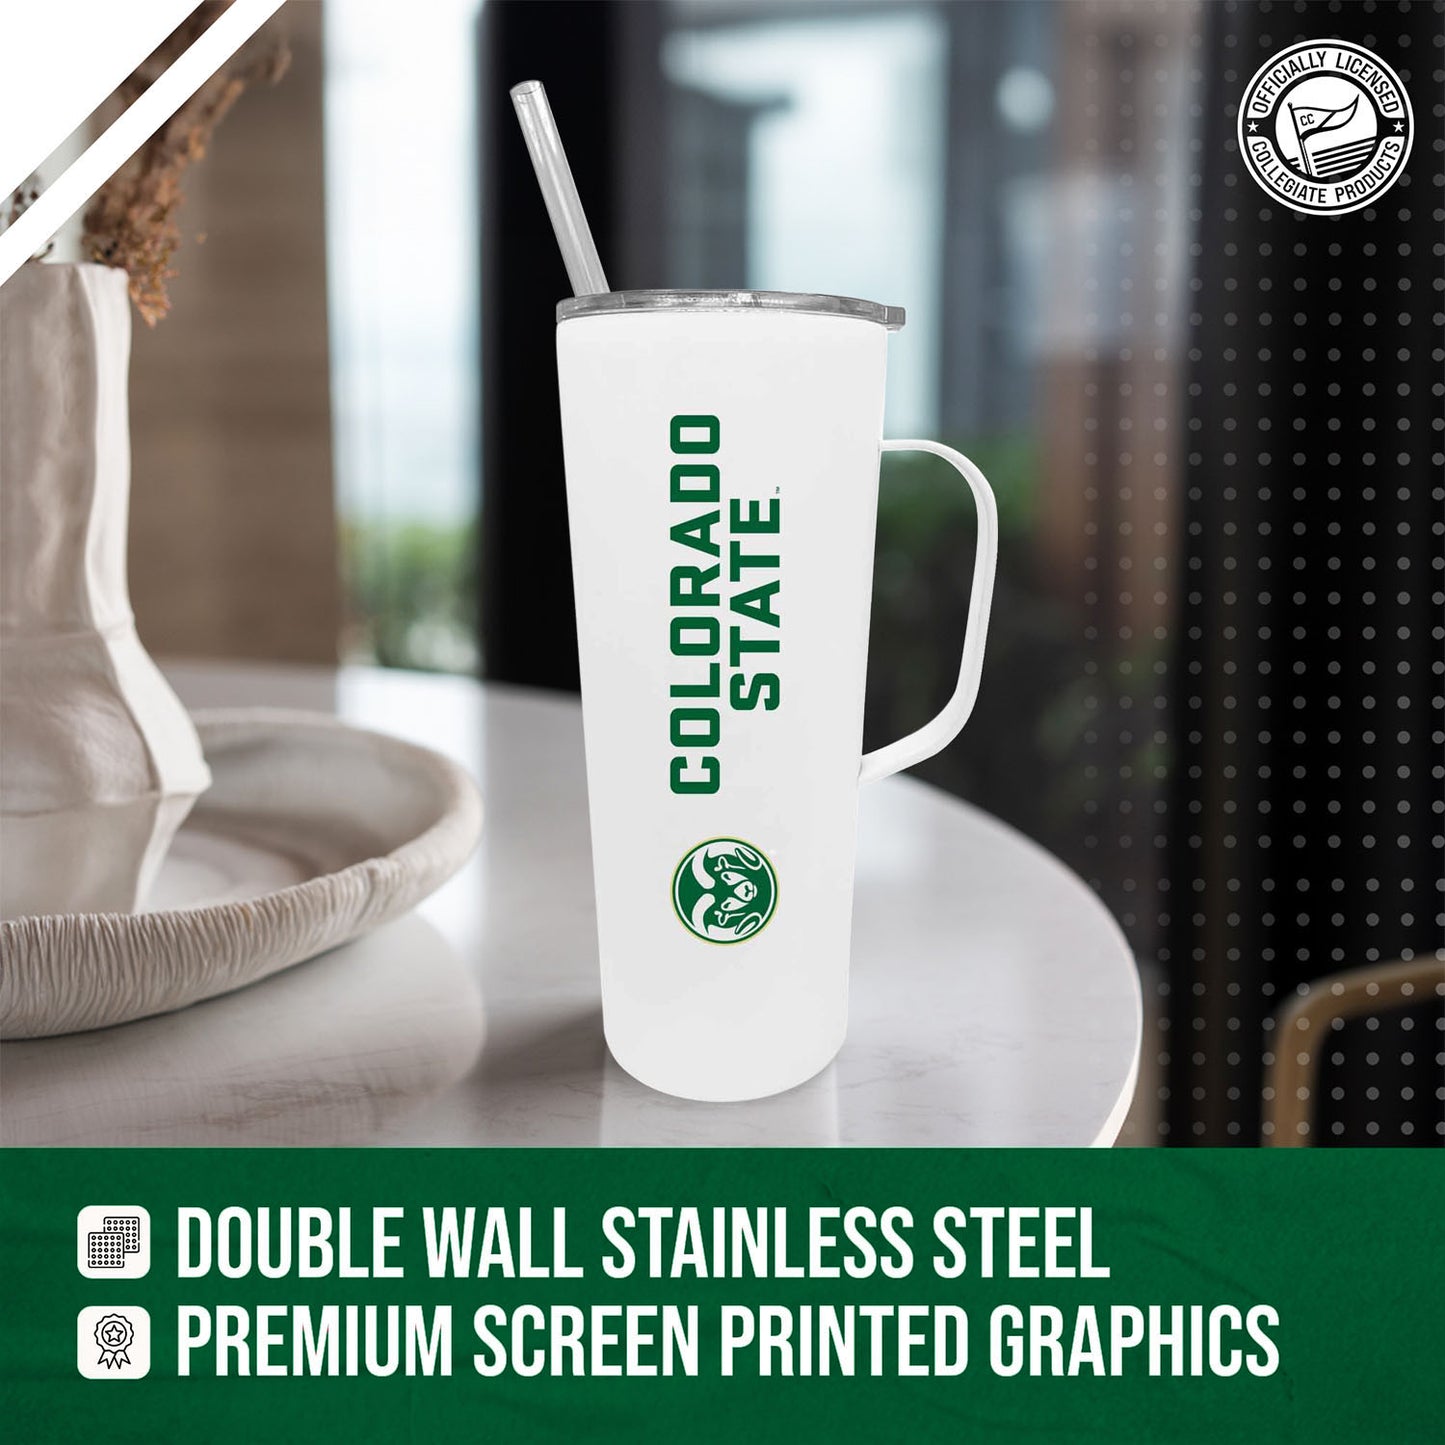 Colorado State Rams NCAA Stainless Steal 20oz Roadie With Handle & Dual Option Lid With Straw - White